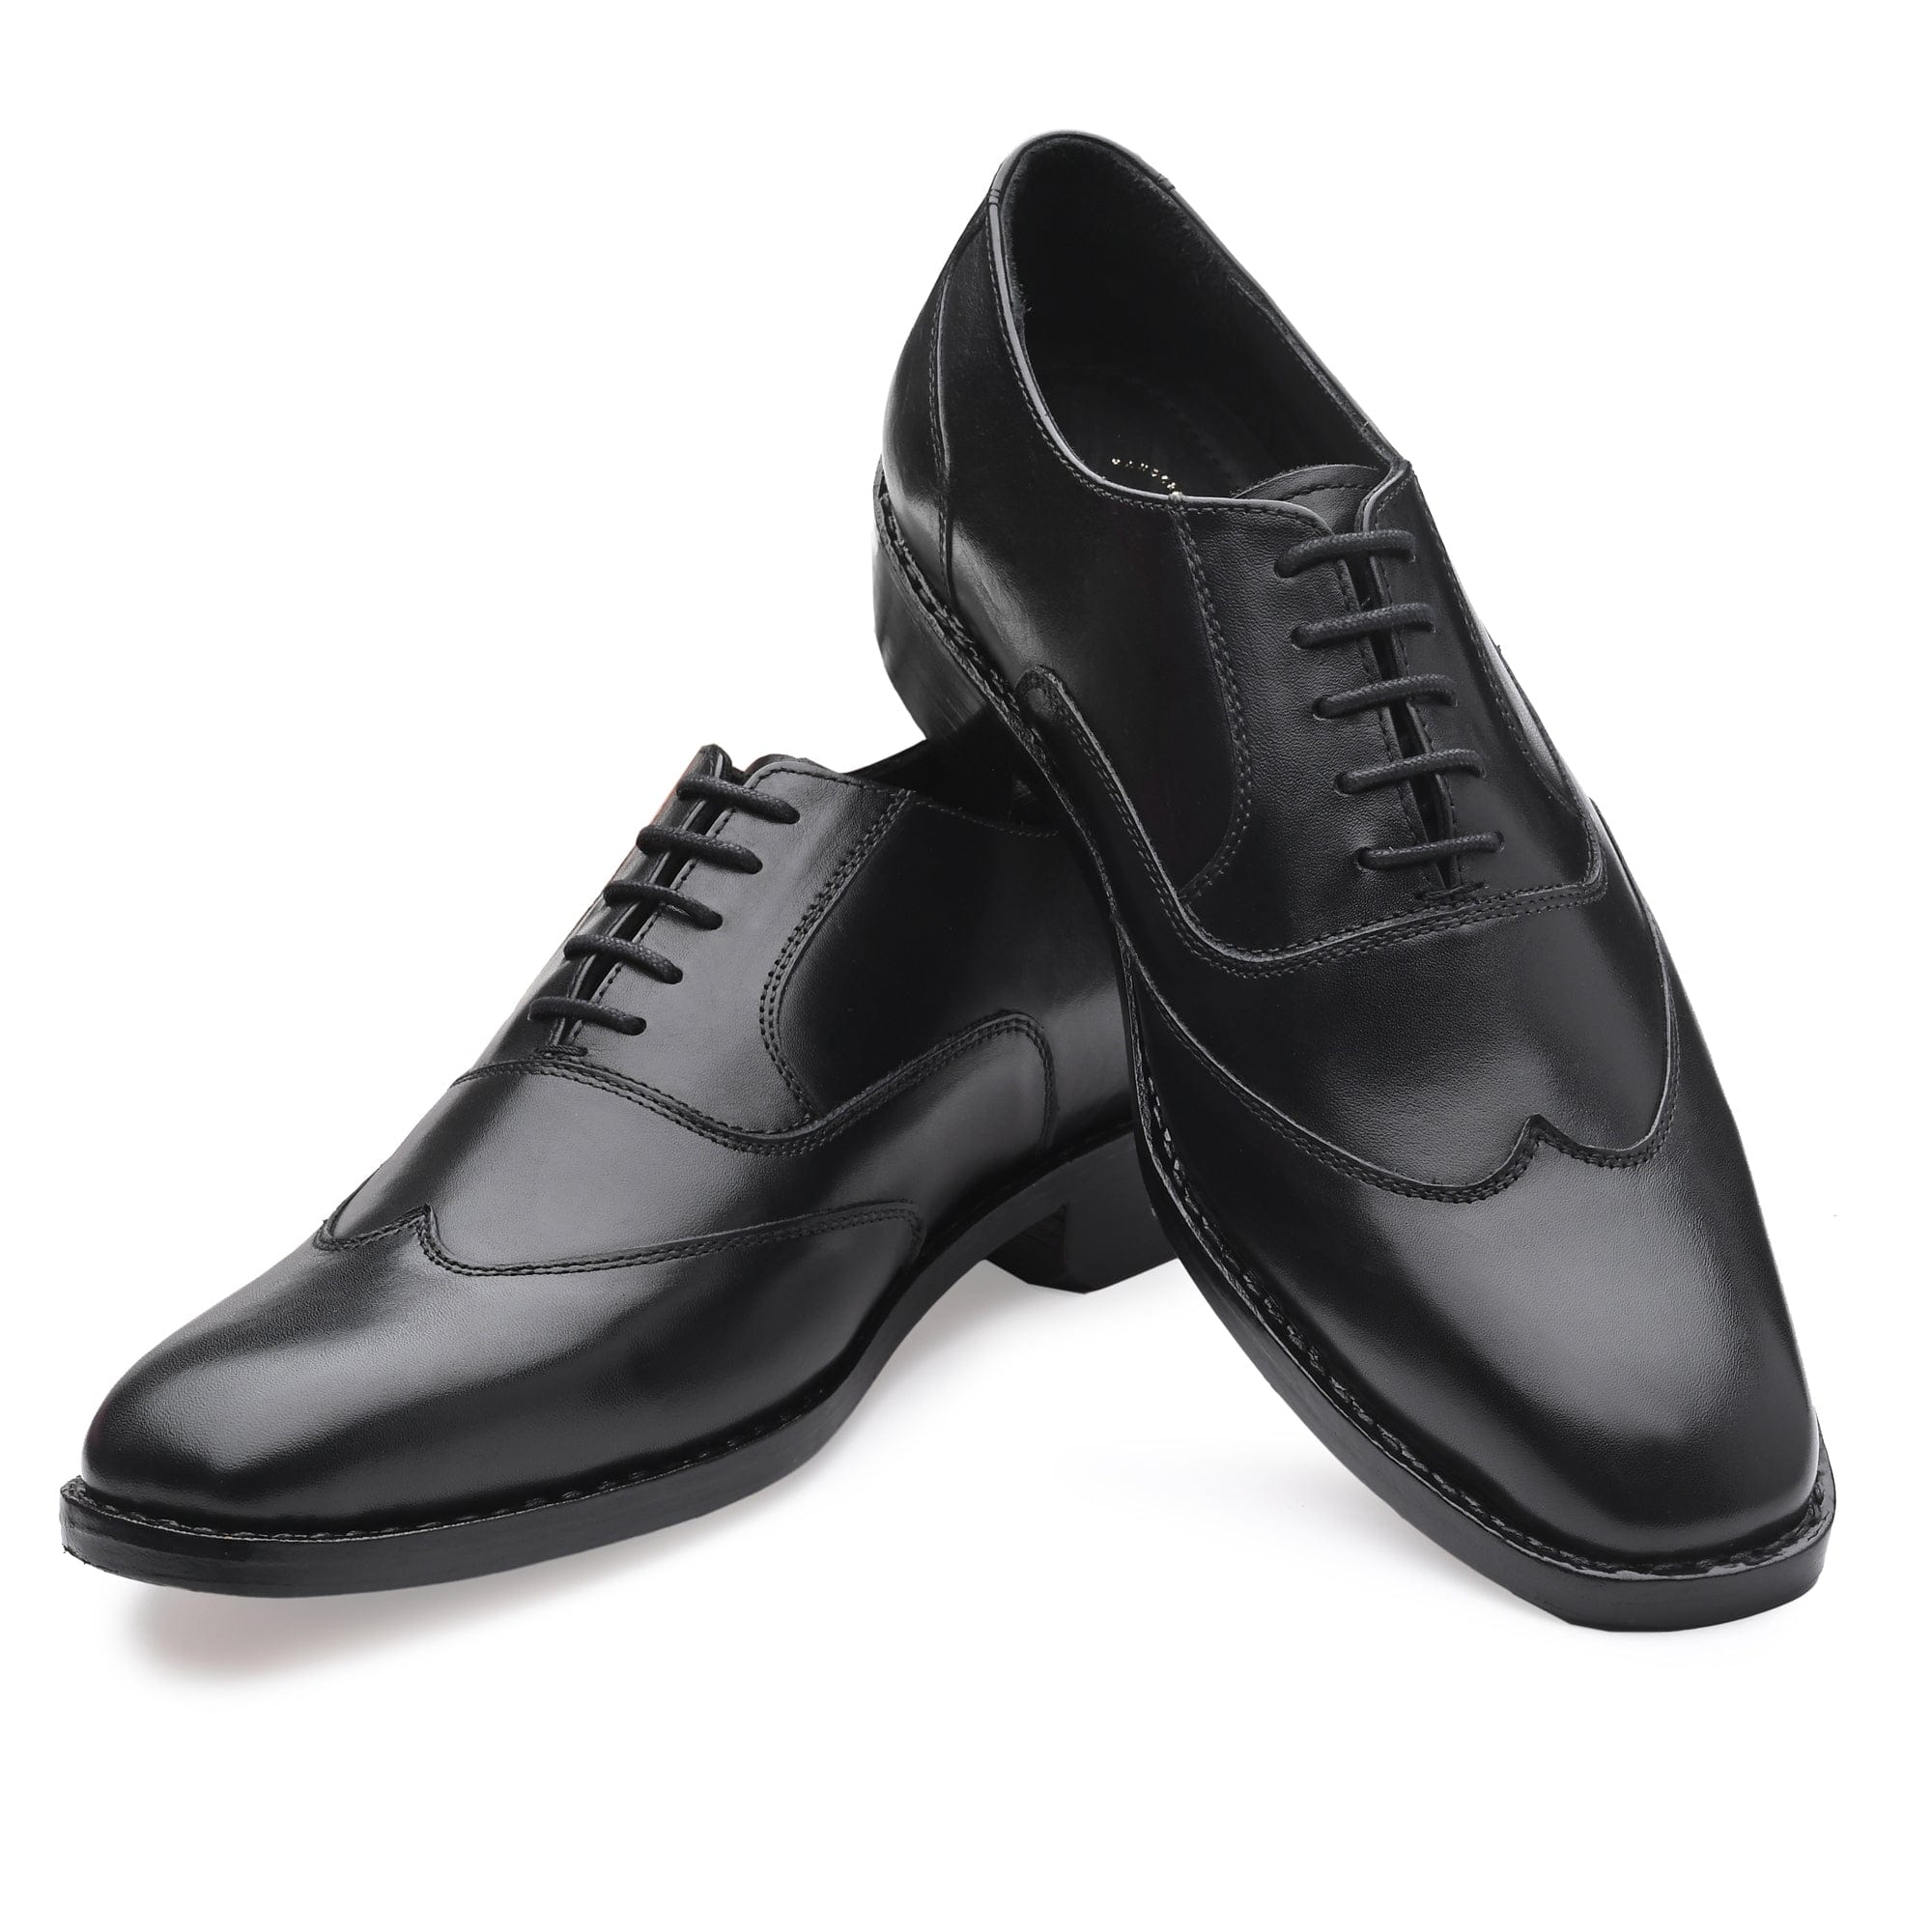 Wingtip Oxford Black Italian Leather Dress Shoes Reverse Goodyear Welted